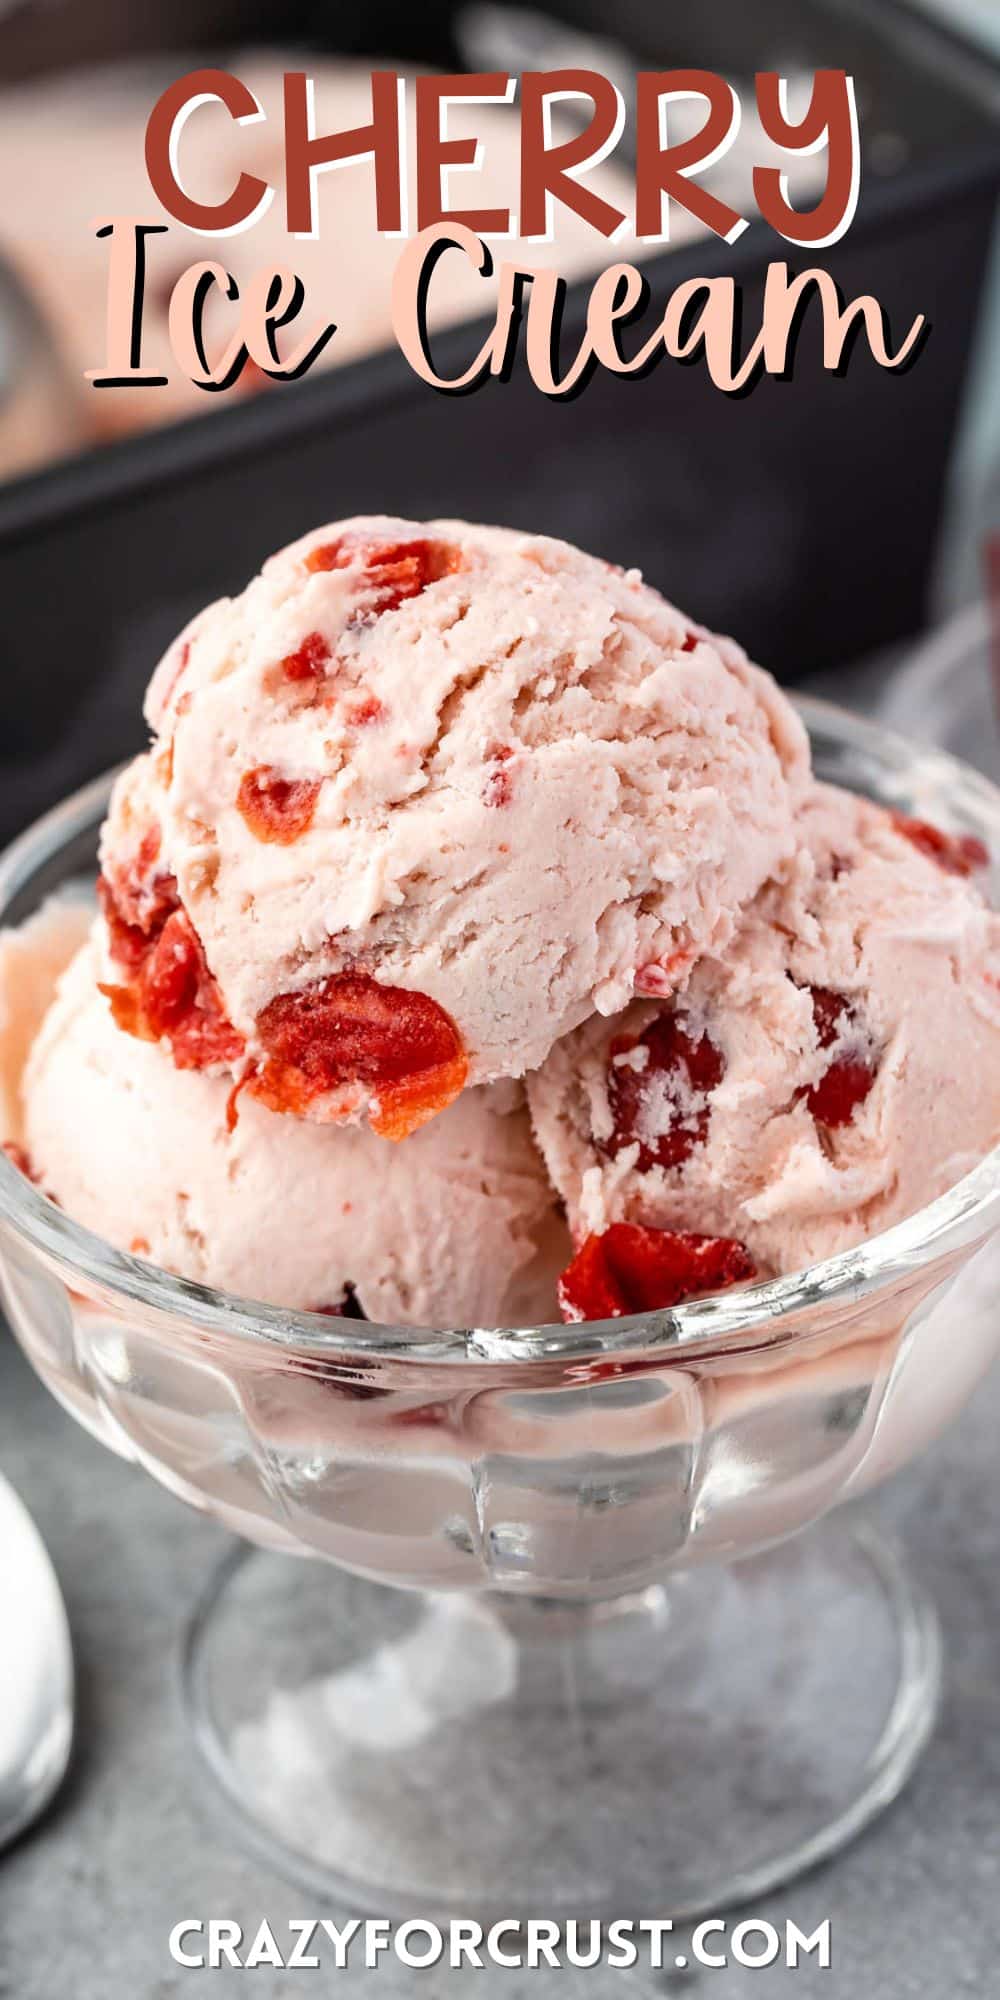 three scoops of cherry ice cream in a clear ice cream bowl with words of the image.